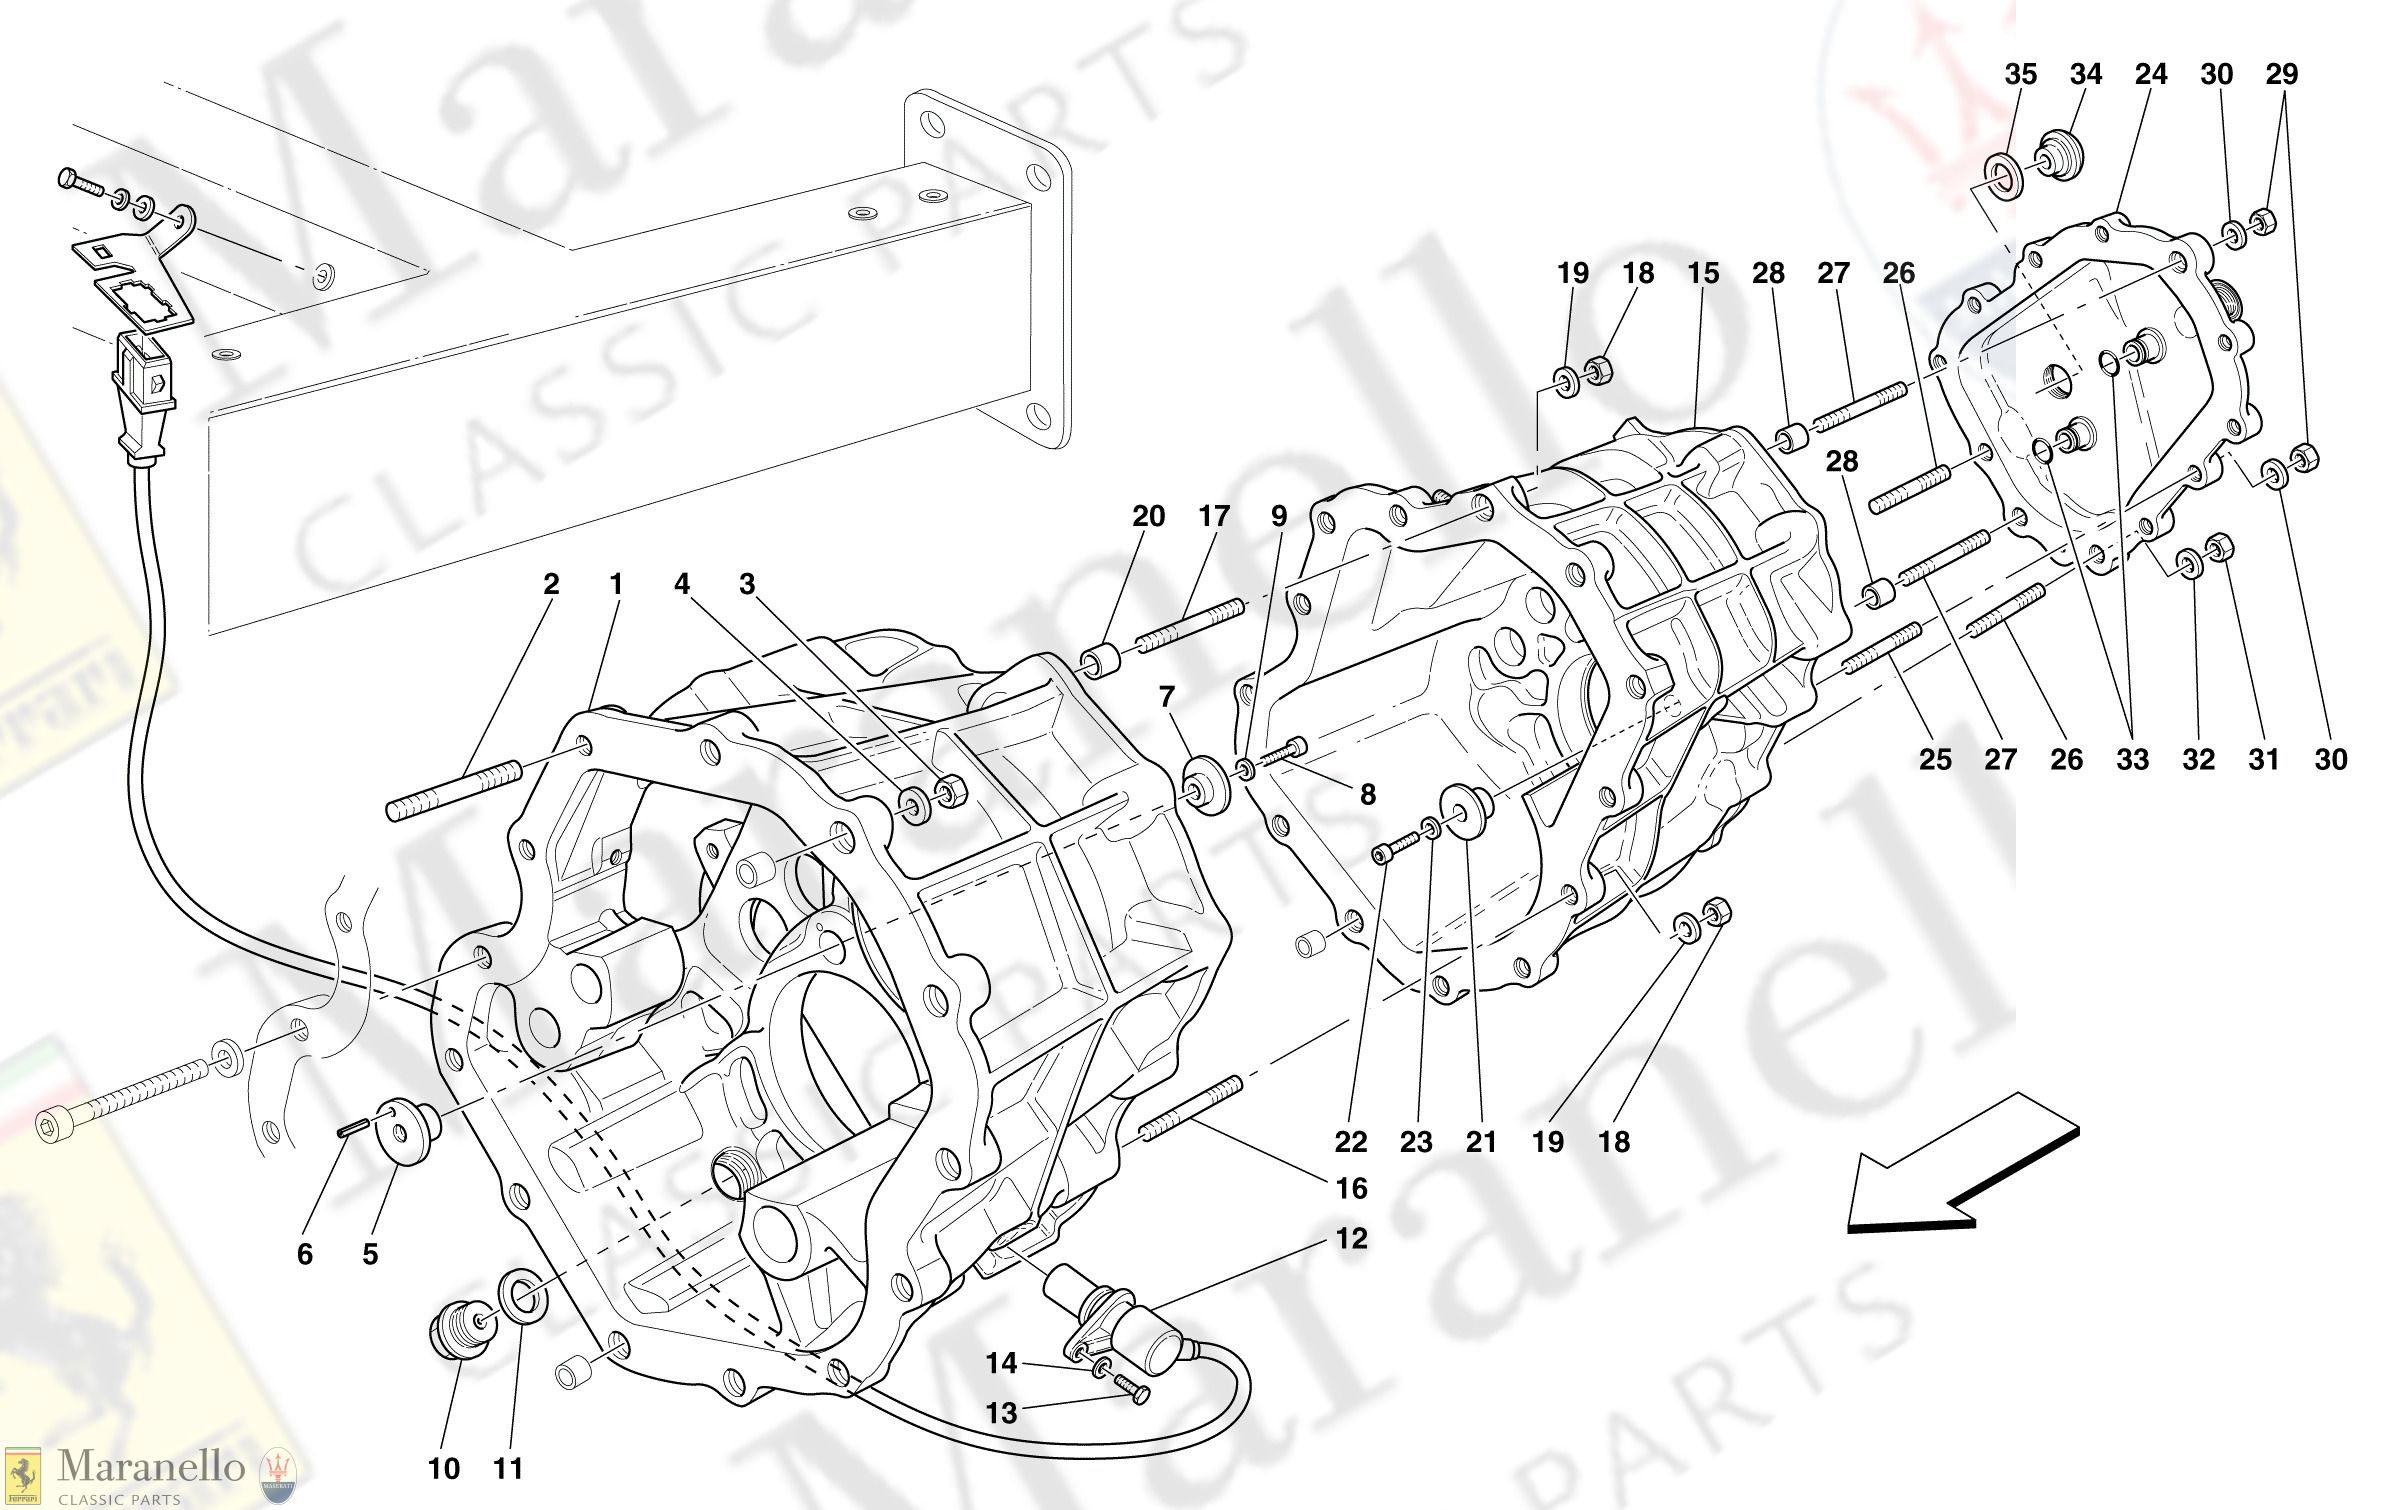 C 26 - Gearbox - Rear Part Gearboxes Housing And Cover